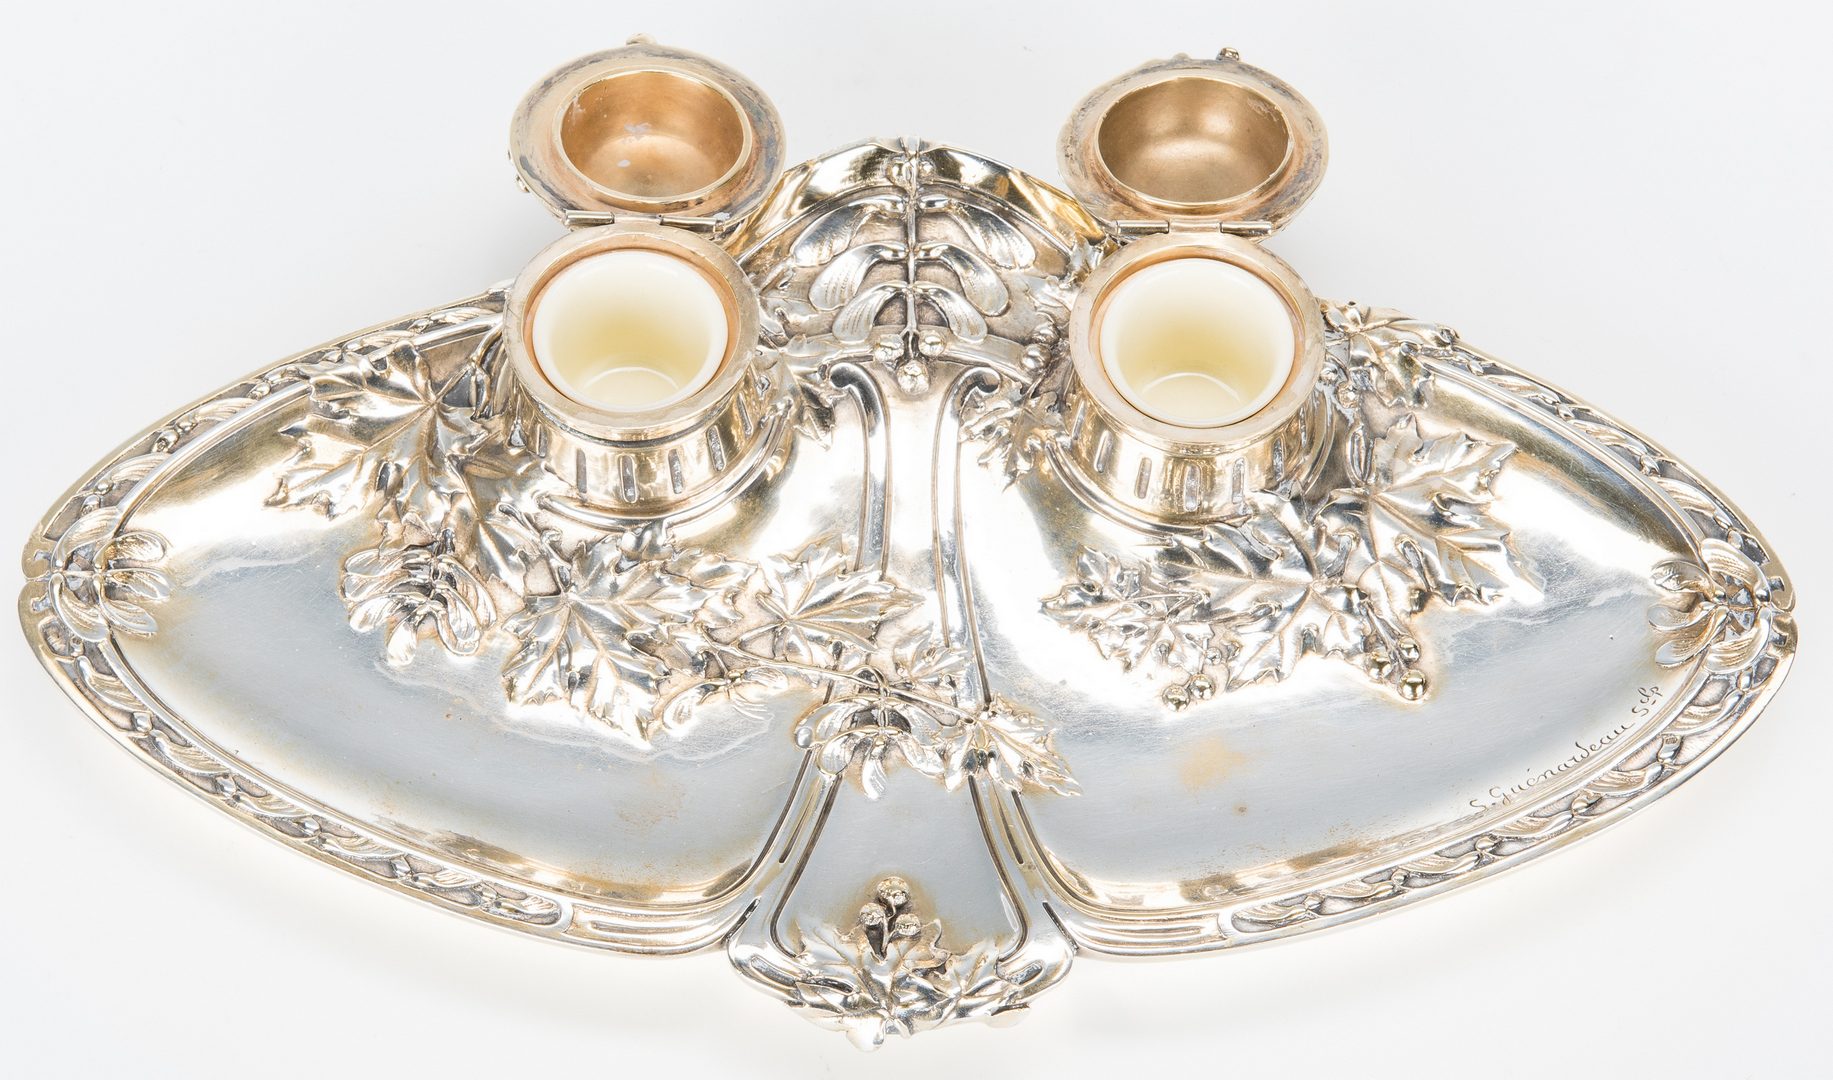 Lot 388: 2 Art Nouveau French Inkwells, signed